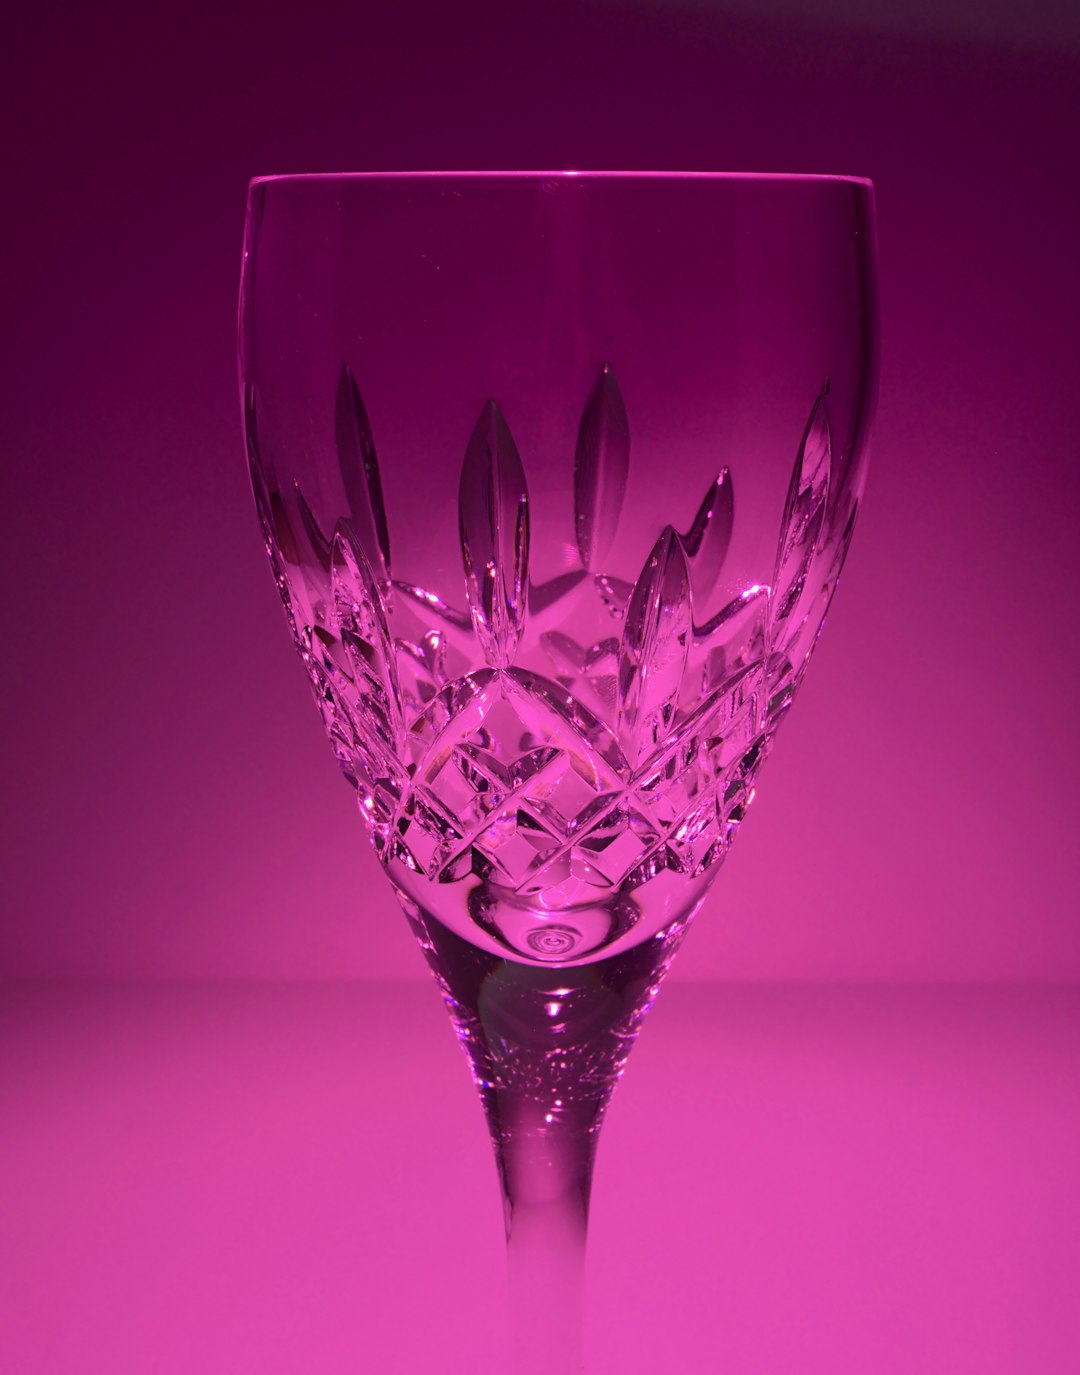 red wine glass on pink surface